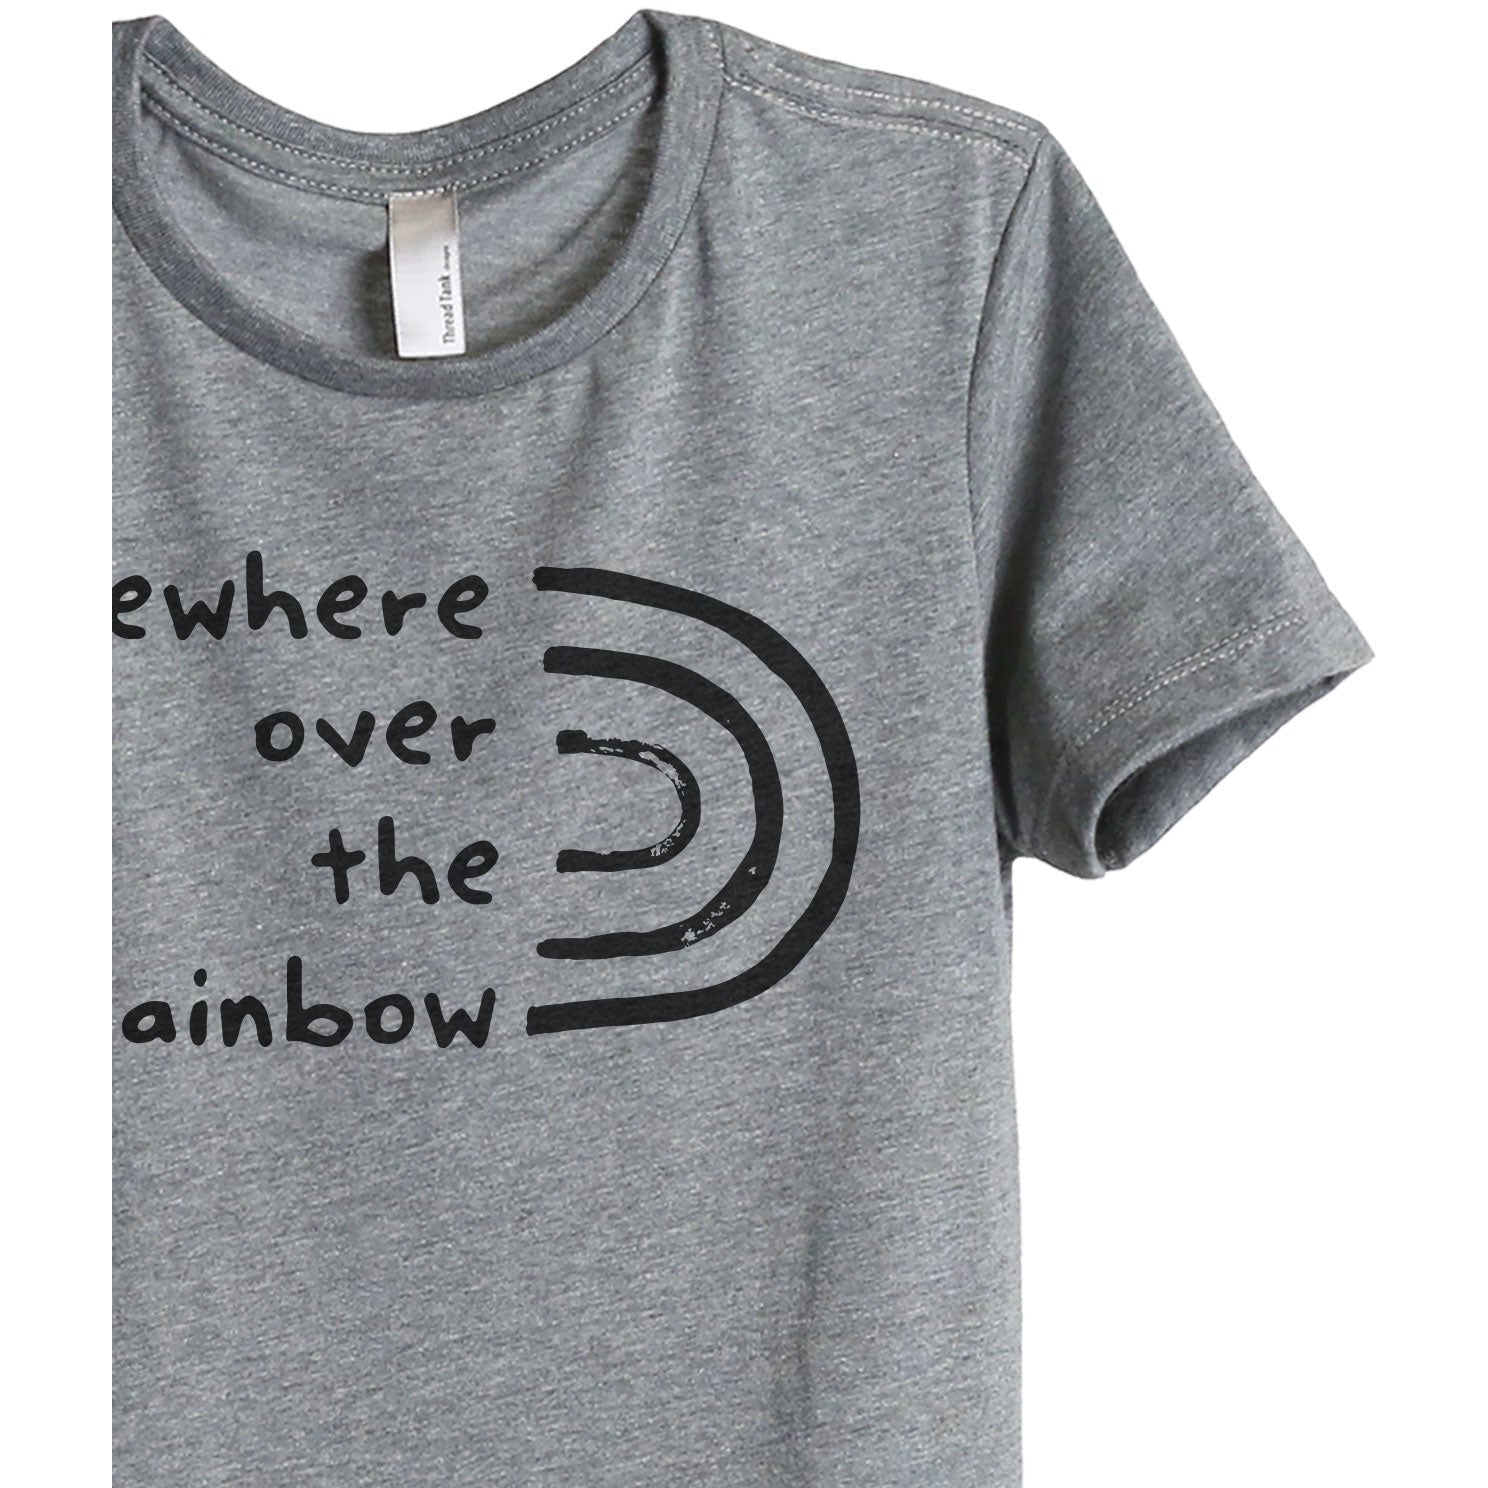 Somewhere Over The Rainbow Women's Relaxed Crewneck T-Shirt Top Tee Heather Grey Zoom Details
